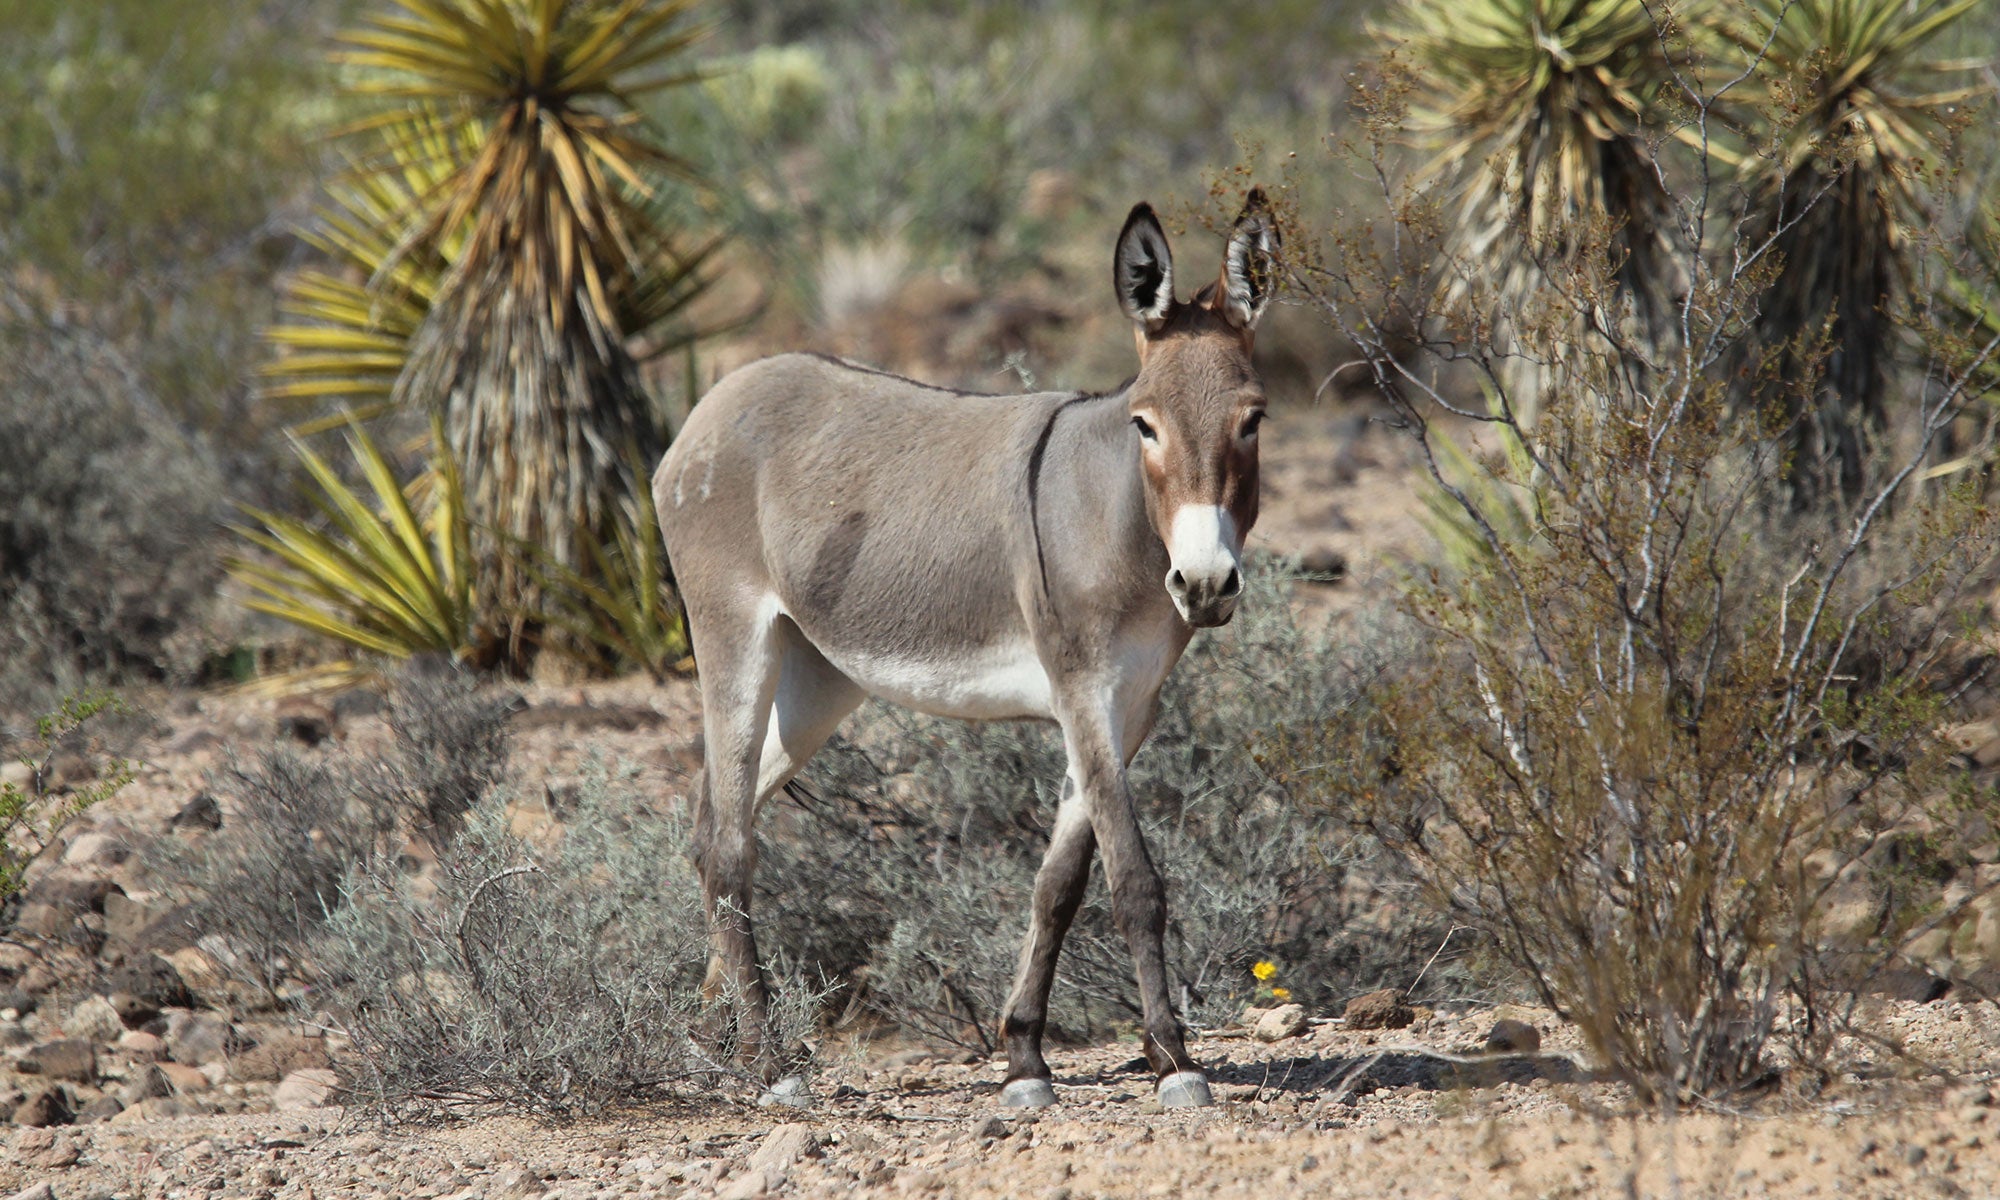 Burros | The Humane Society of the United States